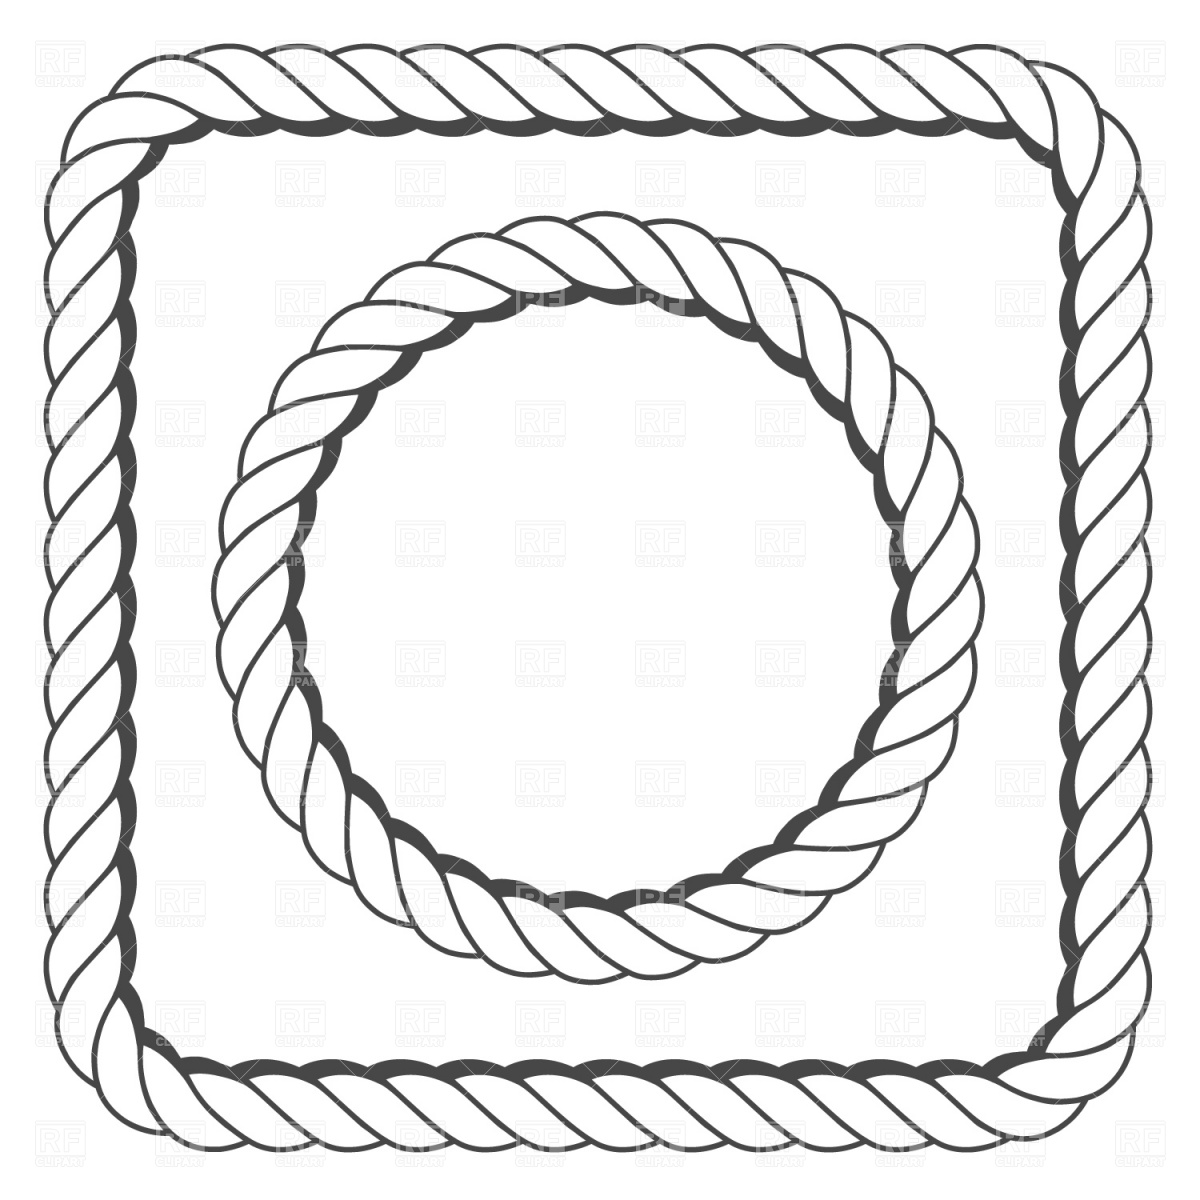 rope frame clipart - photo #20